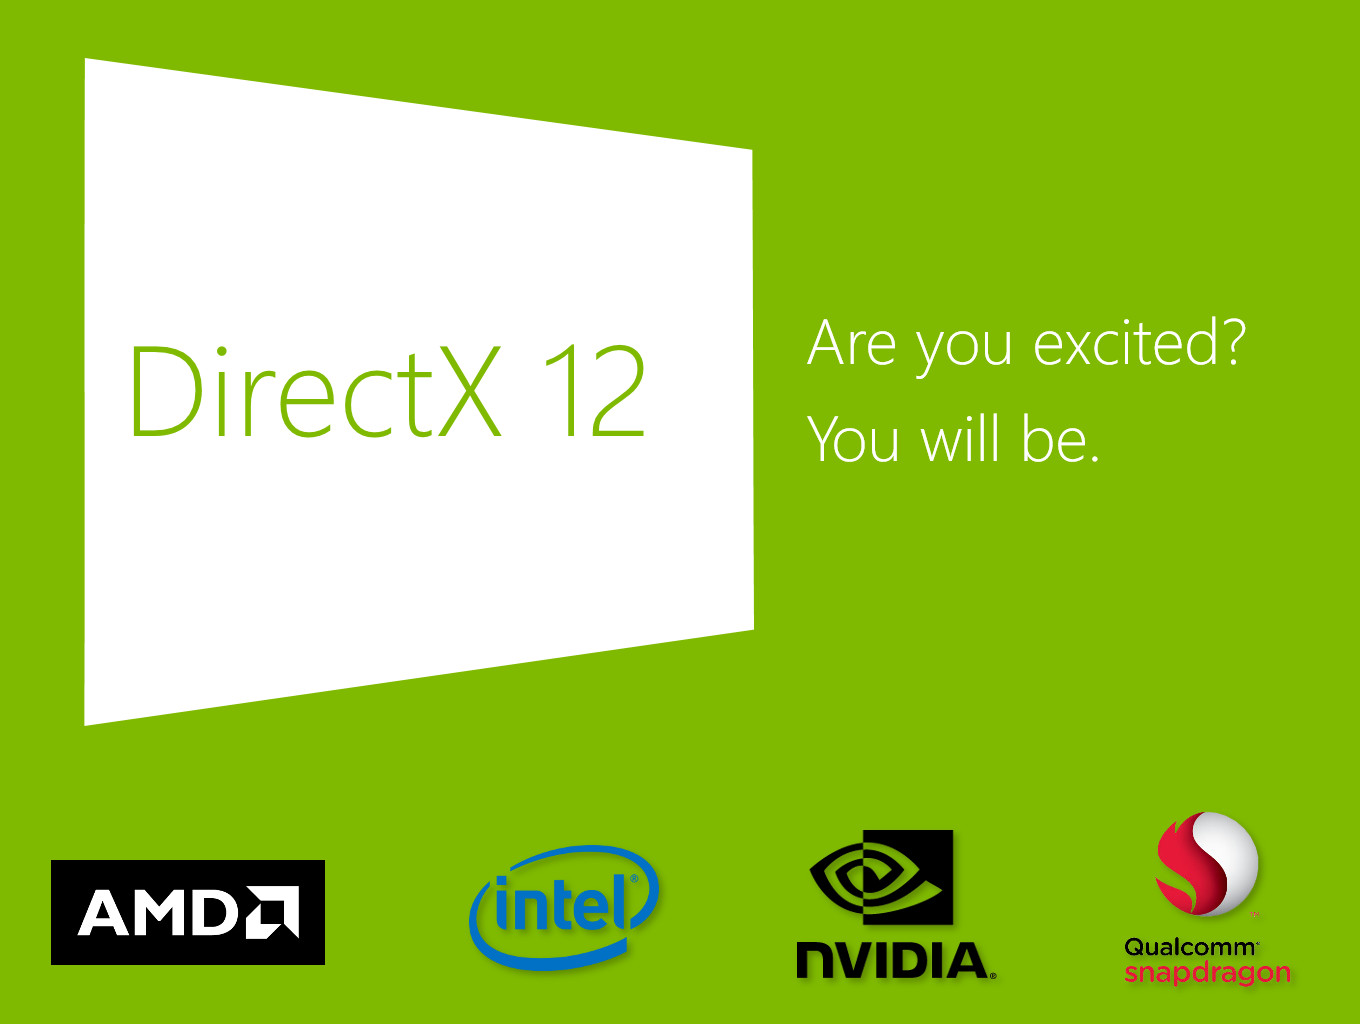 Microsoft Previews New DirectX 12 Features: Raytracing 1.1, Mesh Shader,  and More